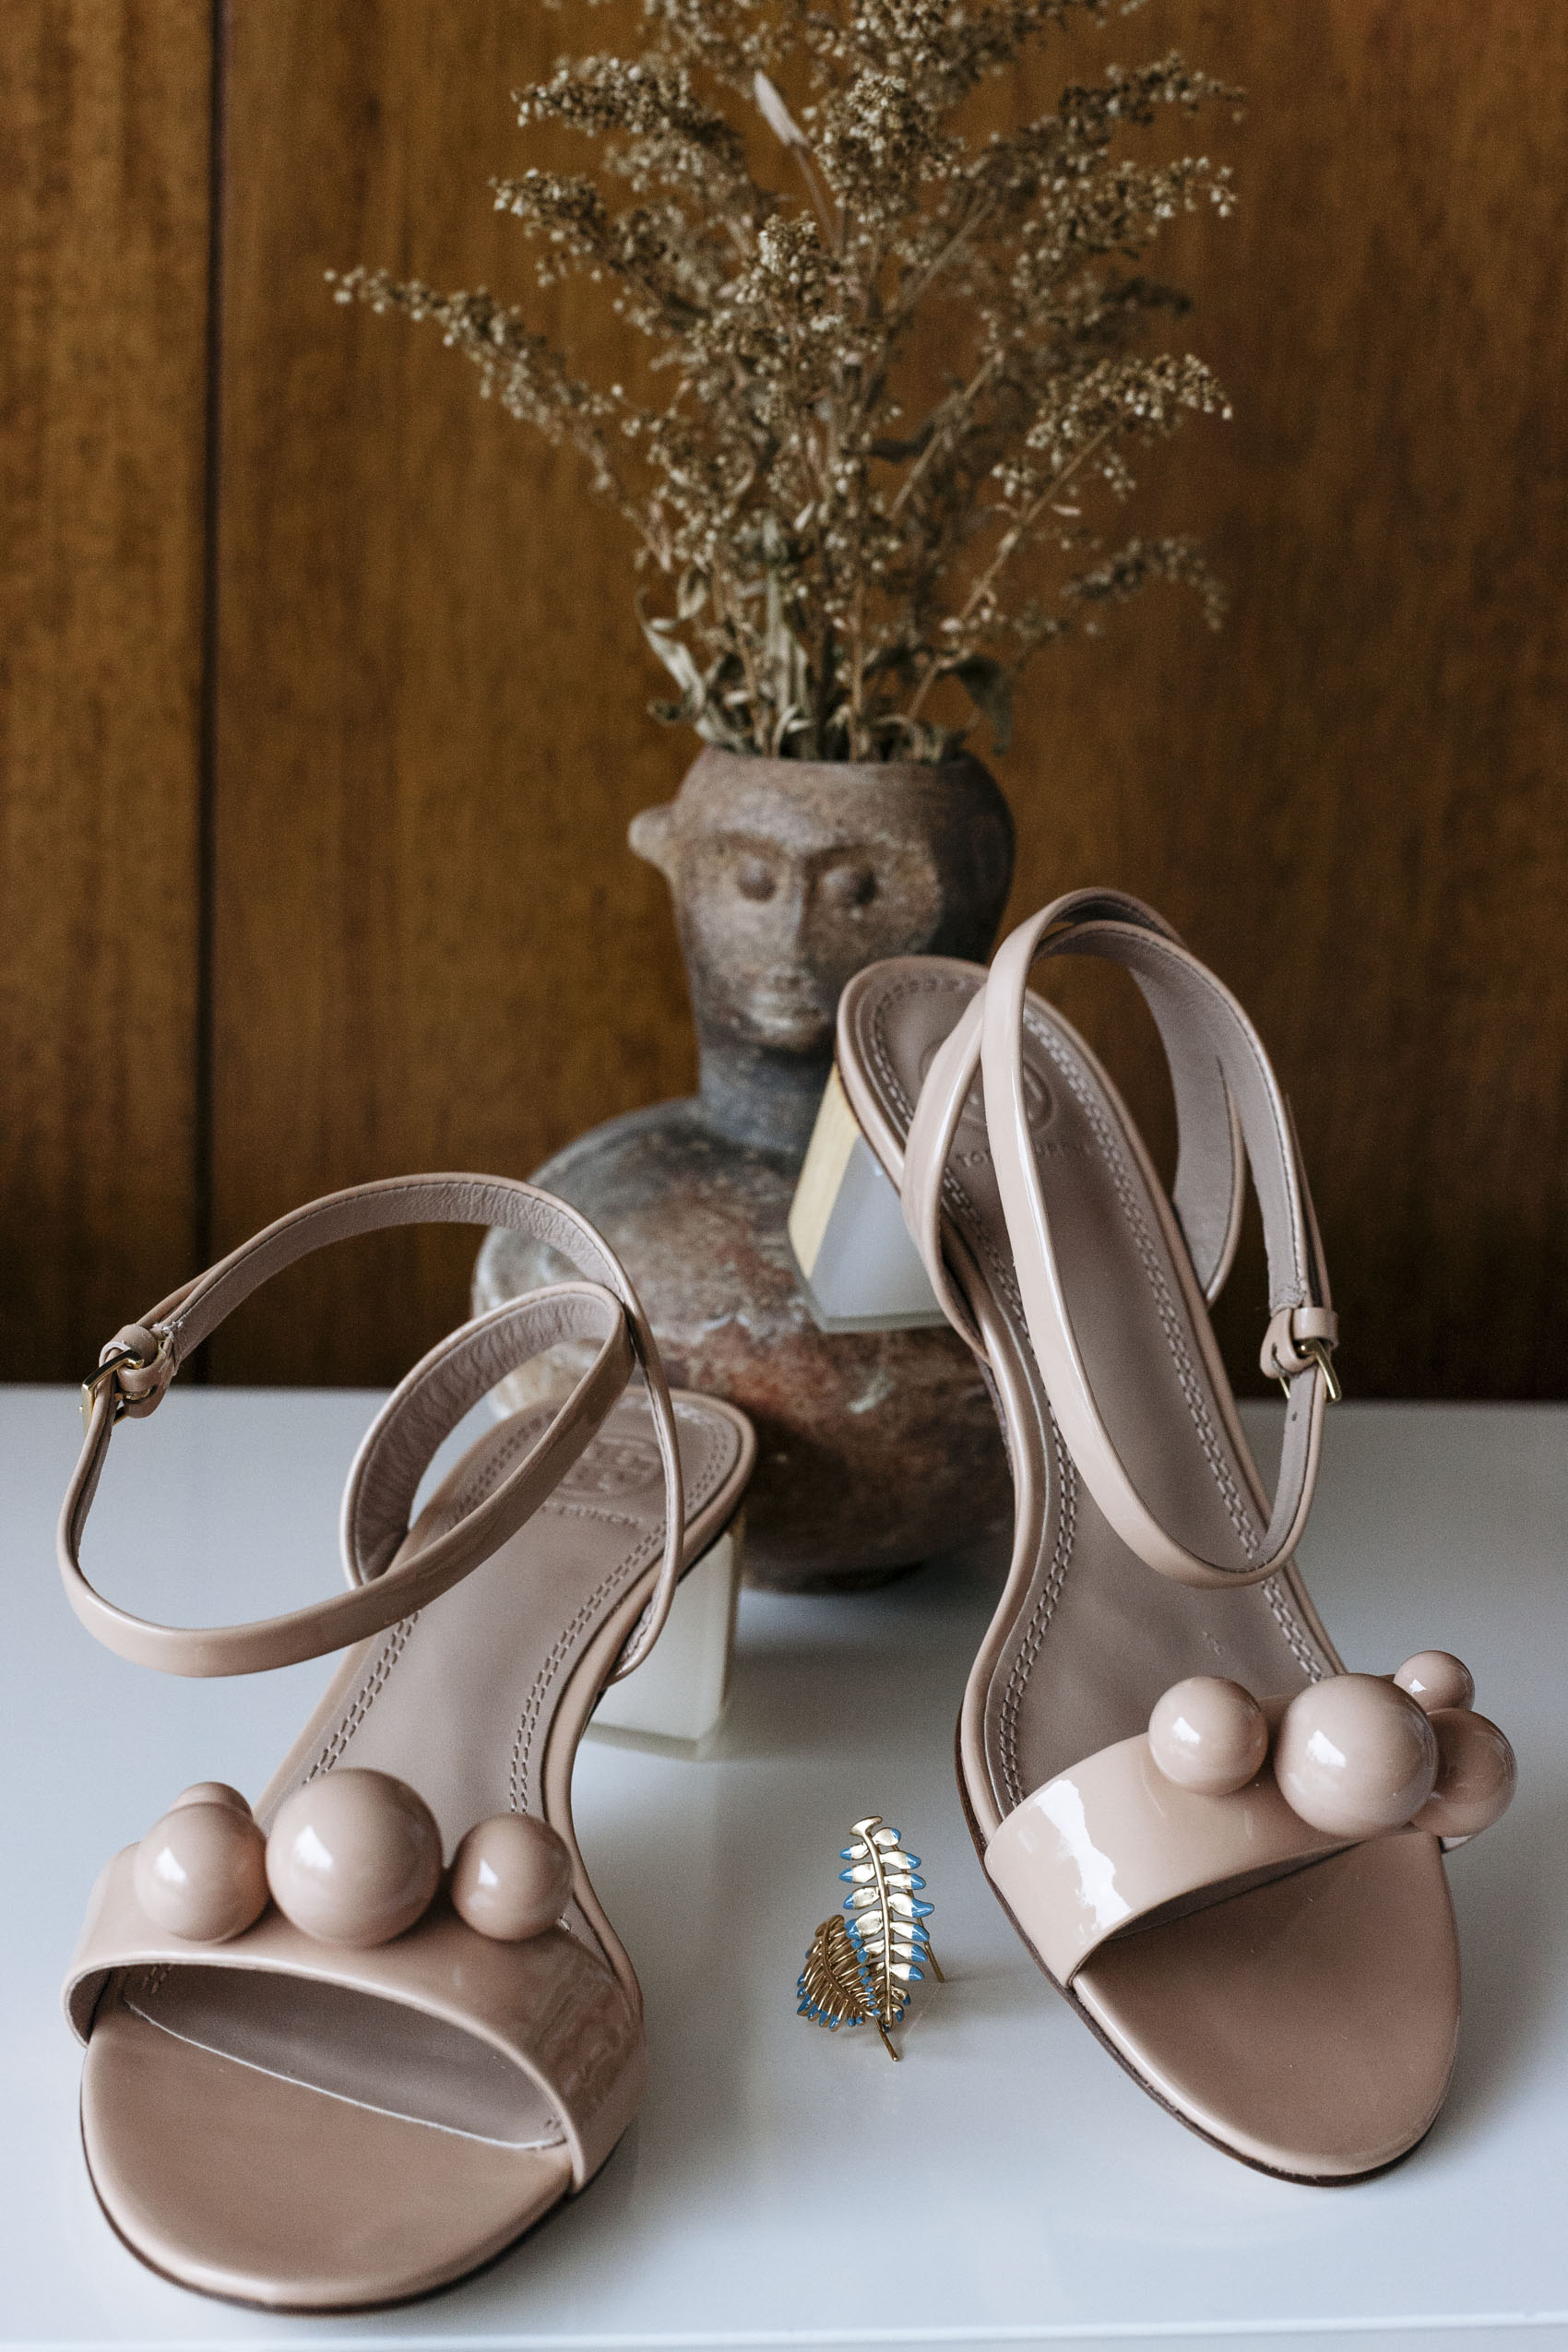 Tory Burch patent nude sandals with spheres and fern ear crawler earrings